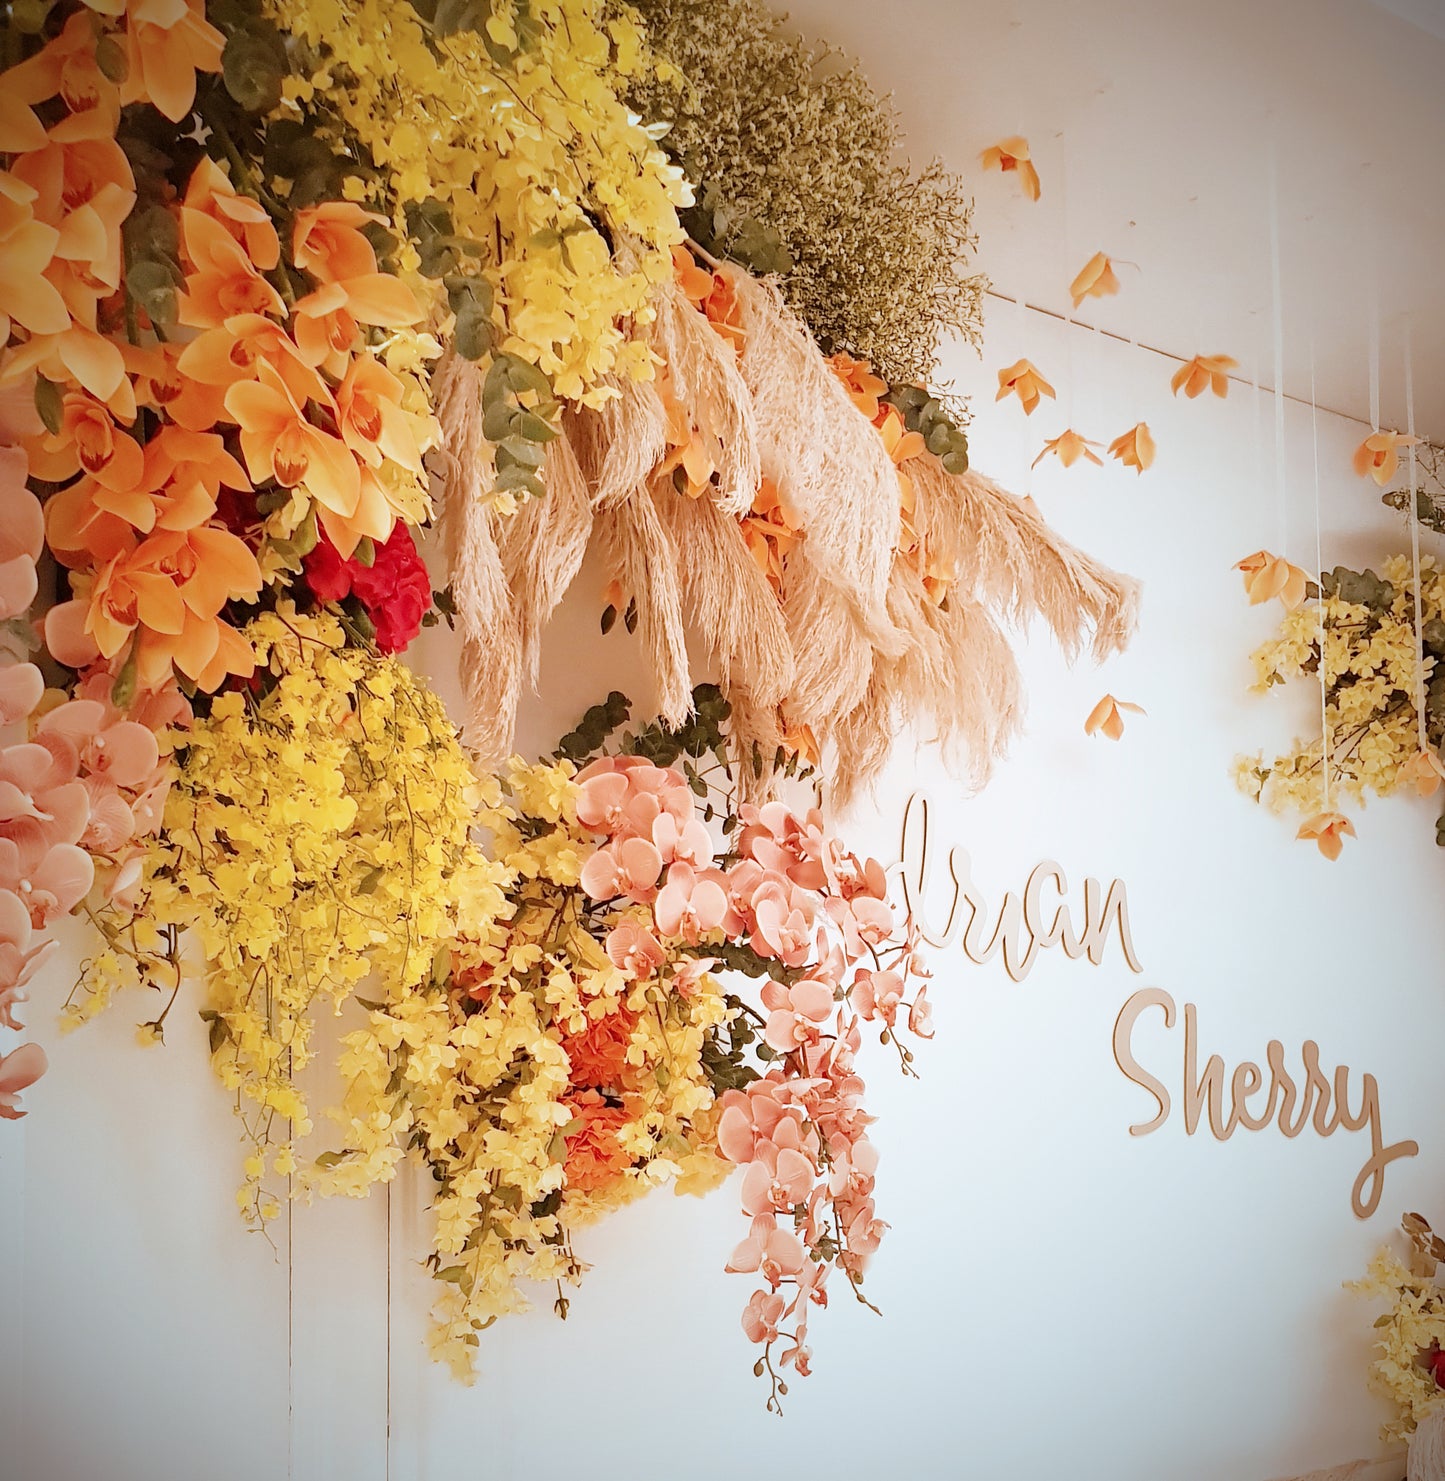 Adrian & Sherry (decor entry at)